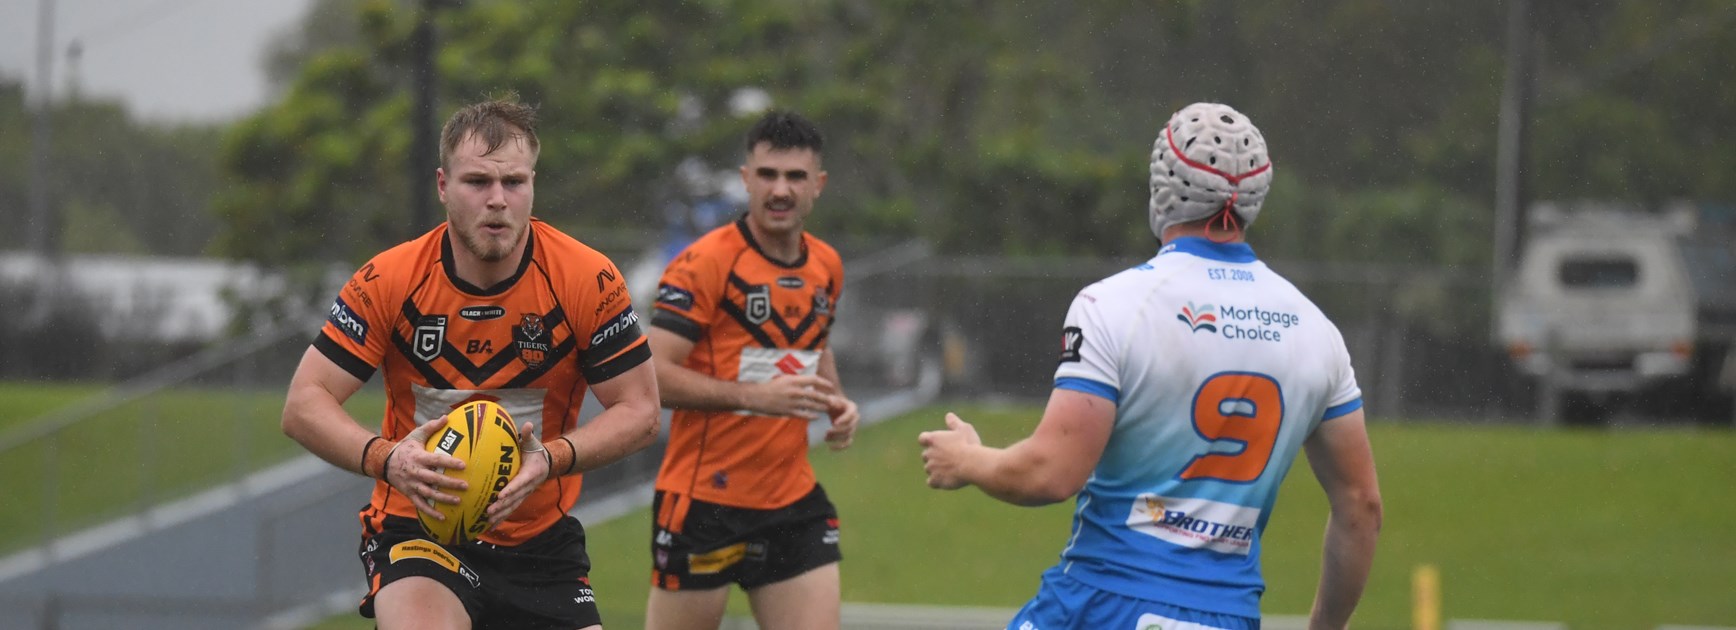 Casey Morgan in action for the Brisbane Tigers Hastings Deering Colts. Photo: Margaret Keates/Brisbane Tigers